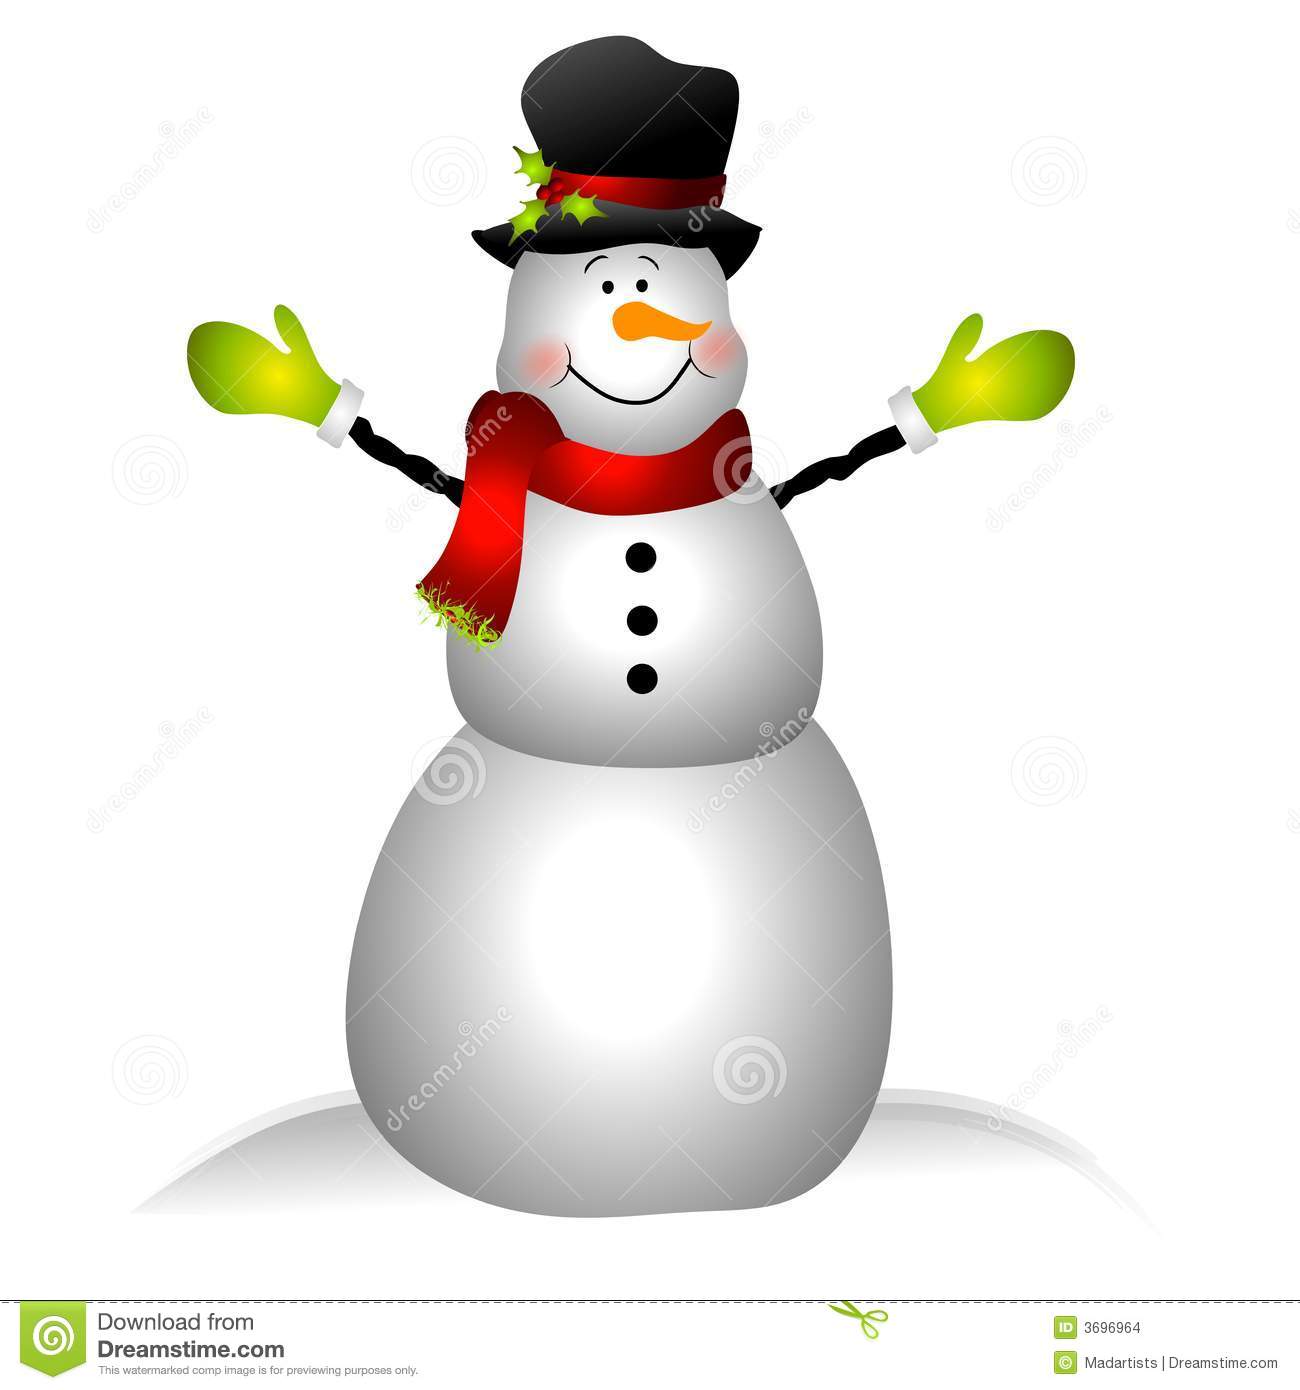 Clip Art Illustration Featuring A Snowman Dressed In Hat Scarf